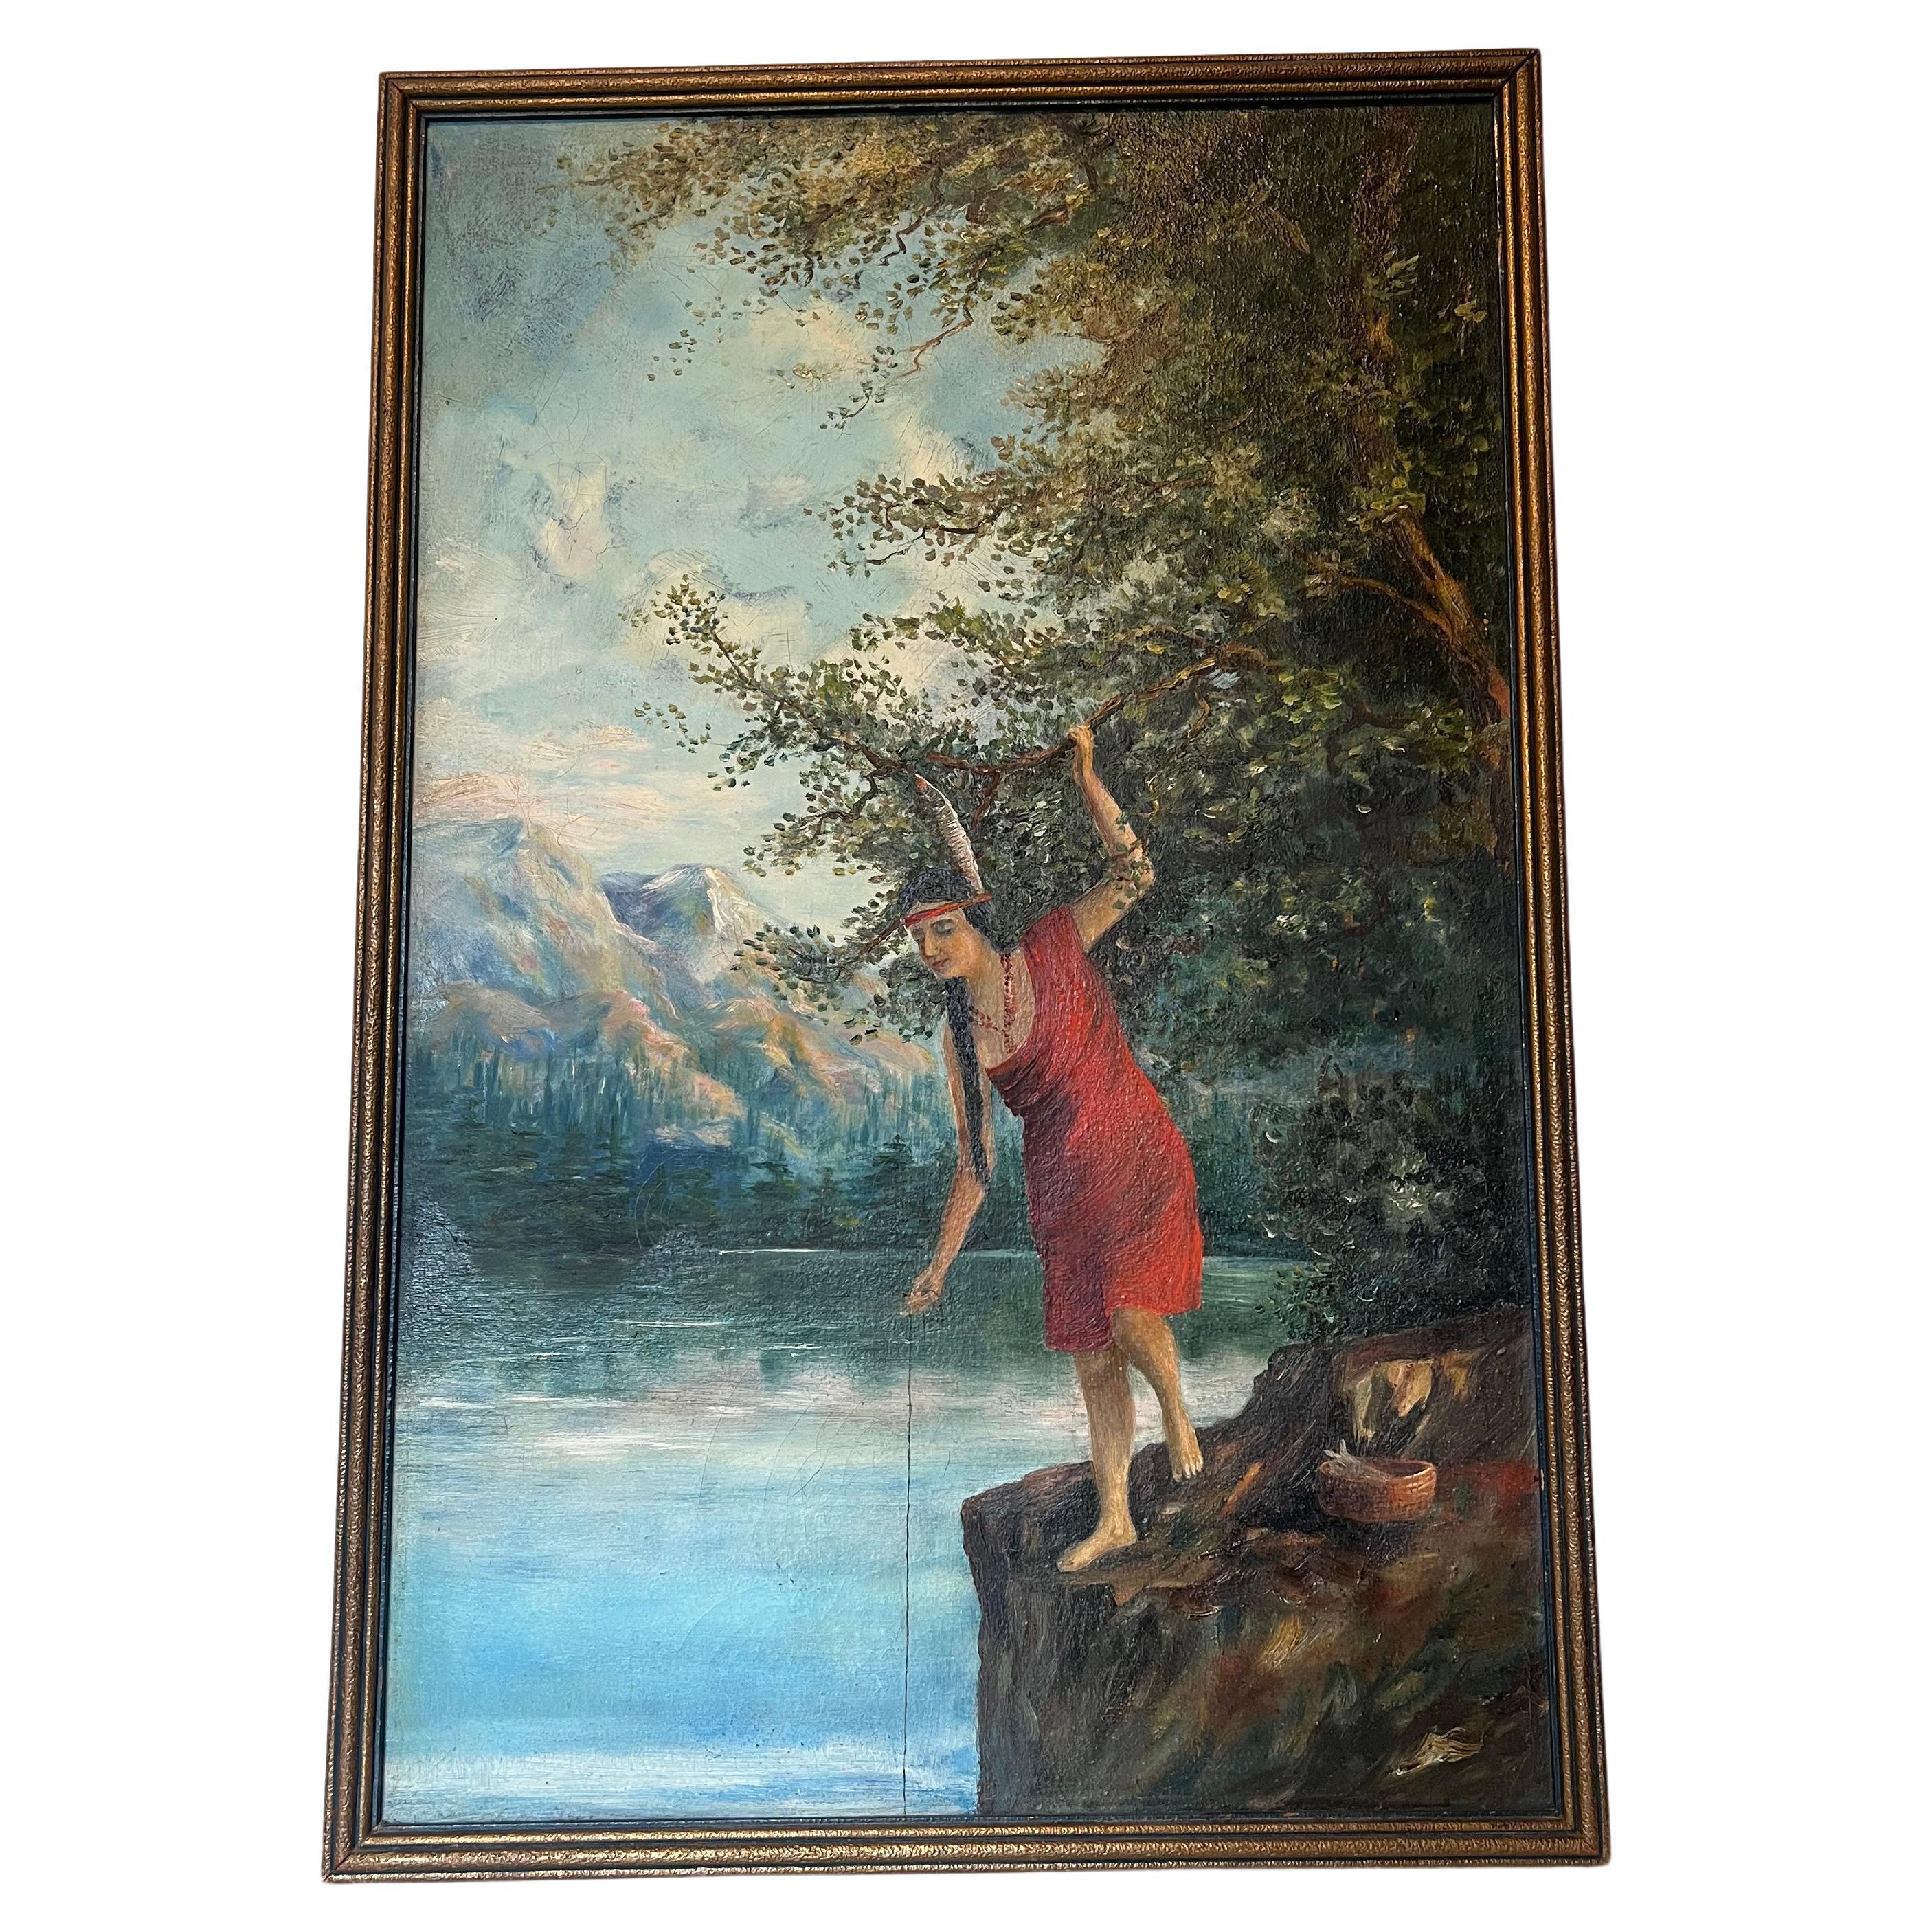 Vintage Signed Framed Scenic 1921 Painting.